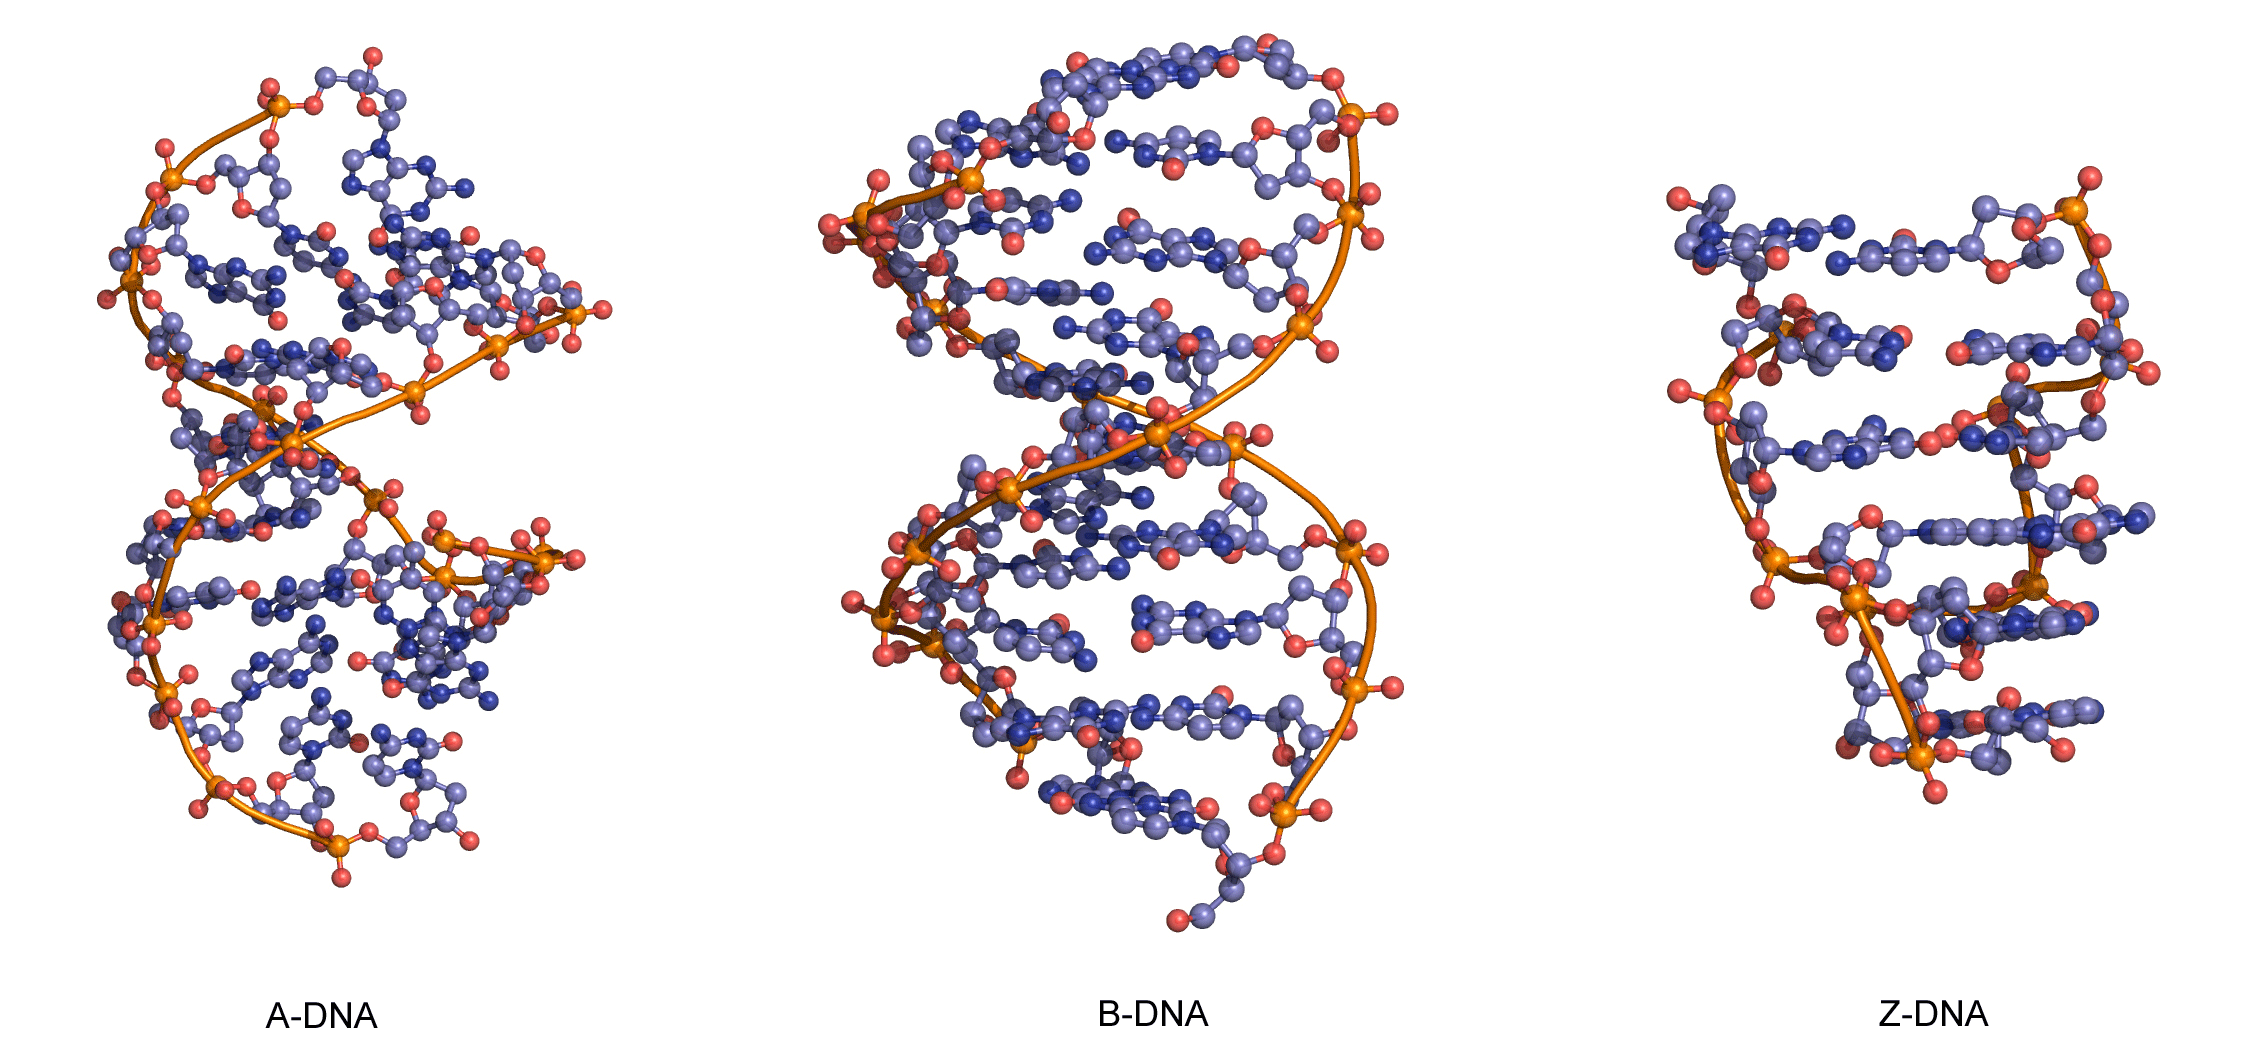 Three-dimensional structures of A-DNA, B-DNA and Z-DNA